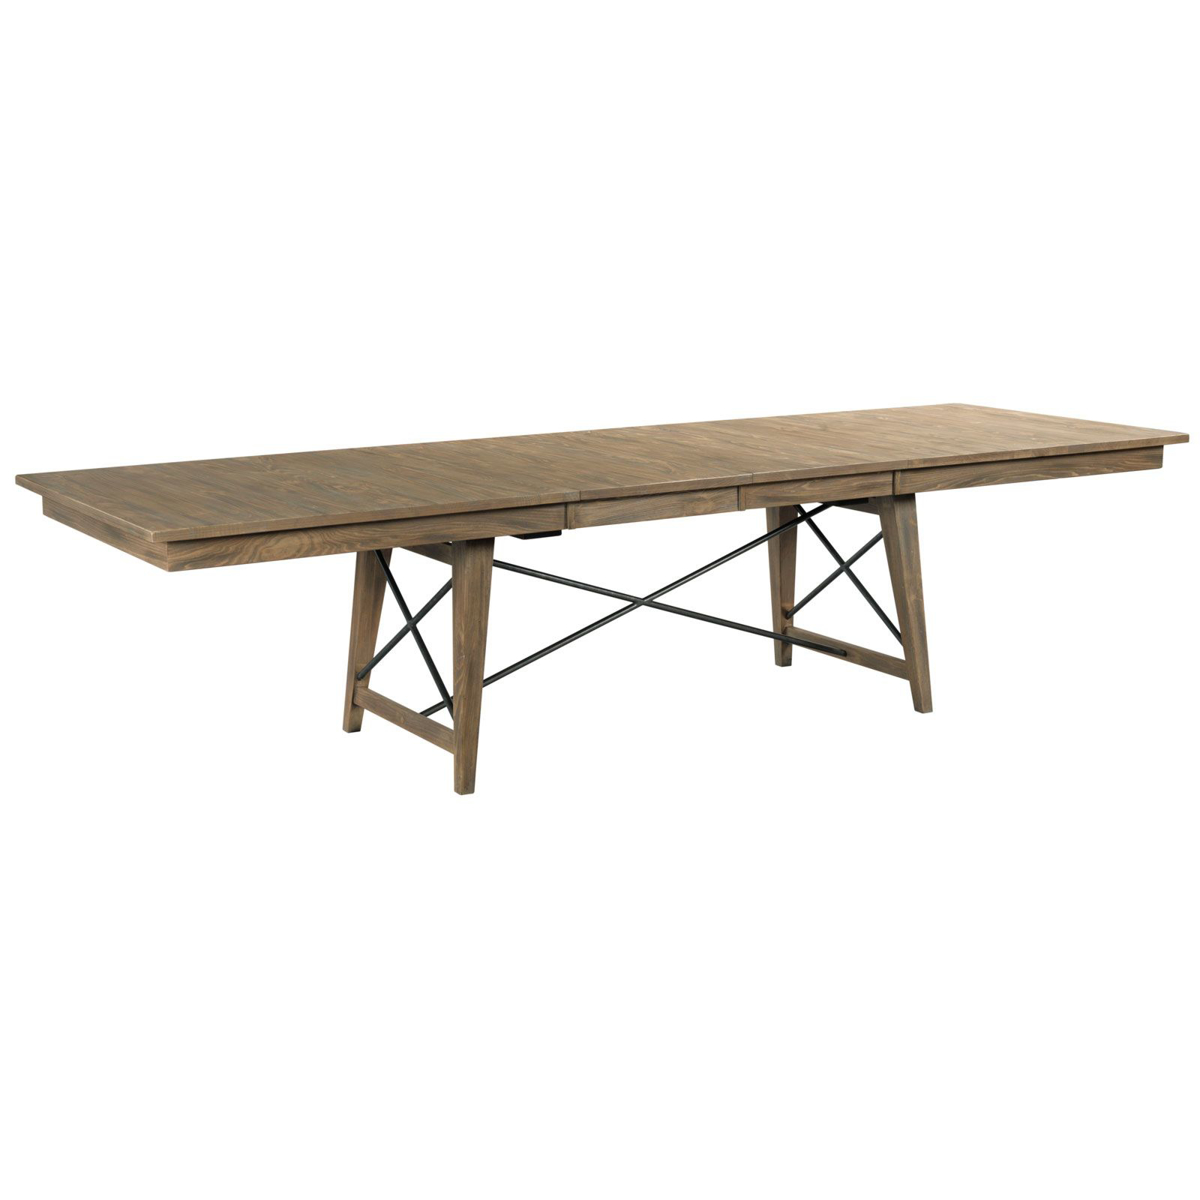 Picture of Laredo Dining Table